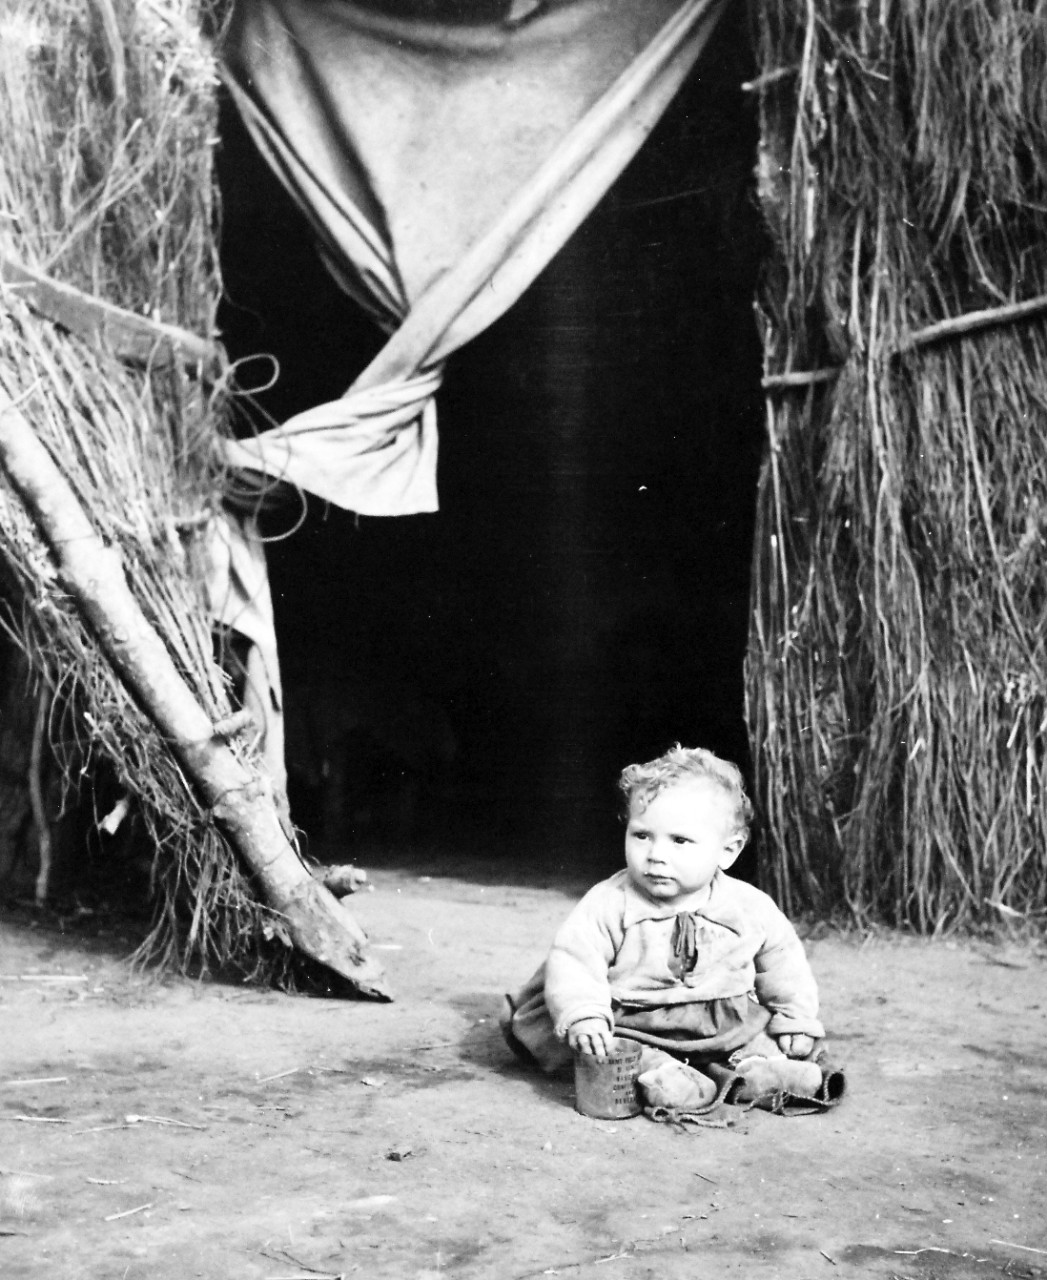 80-G-58429:    Battle of Anzio, January-June 1944.     Italians of Anzio, Italy.  Italian boy-baby poses for his picture outside his grass home.      Official  U.S. Navy photograph, now in the collections of the National Archives.  (2016/06/28).